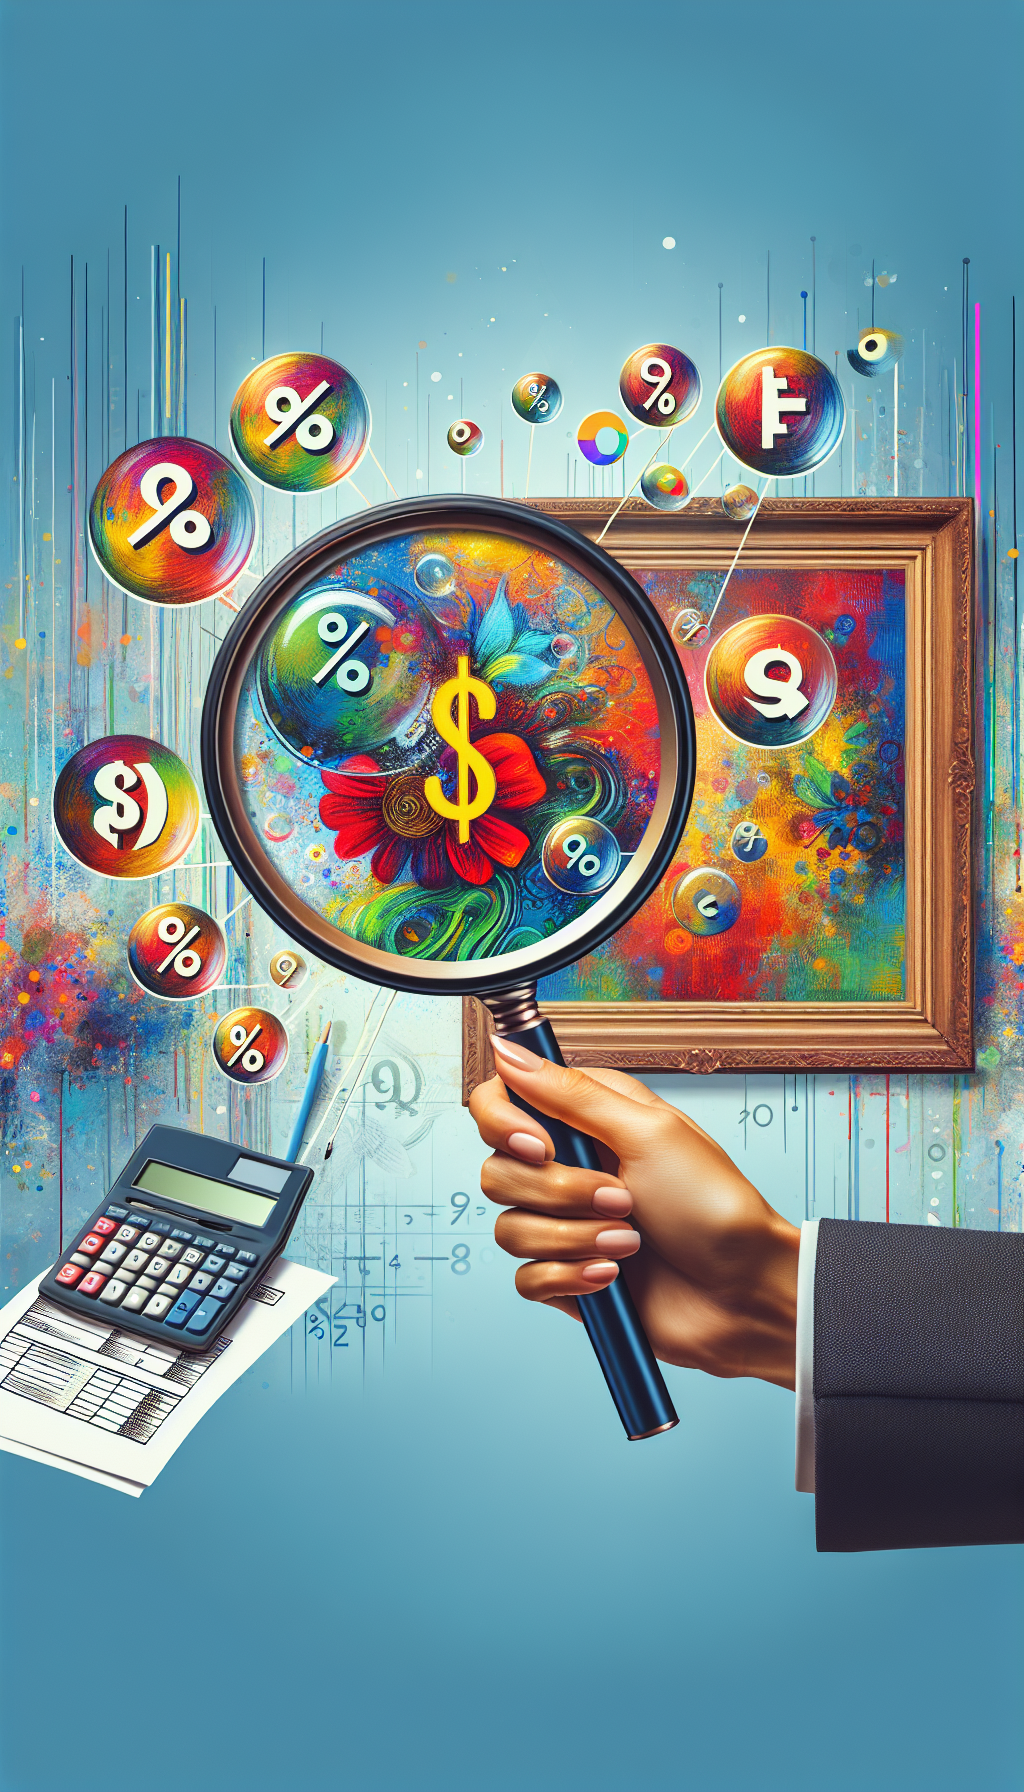 A whimsical illustration depicts a hand holding a magnifying glass over a vibrant, framed painting, with dollar signs, percentages, and grading letters appearing through the lens in a bubble-like fashion, symbolizing appraisal value. A calculator and an official appraisal document sit in the background, blending financial elements with the artistic theme to emphasize calculated valuation.